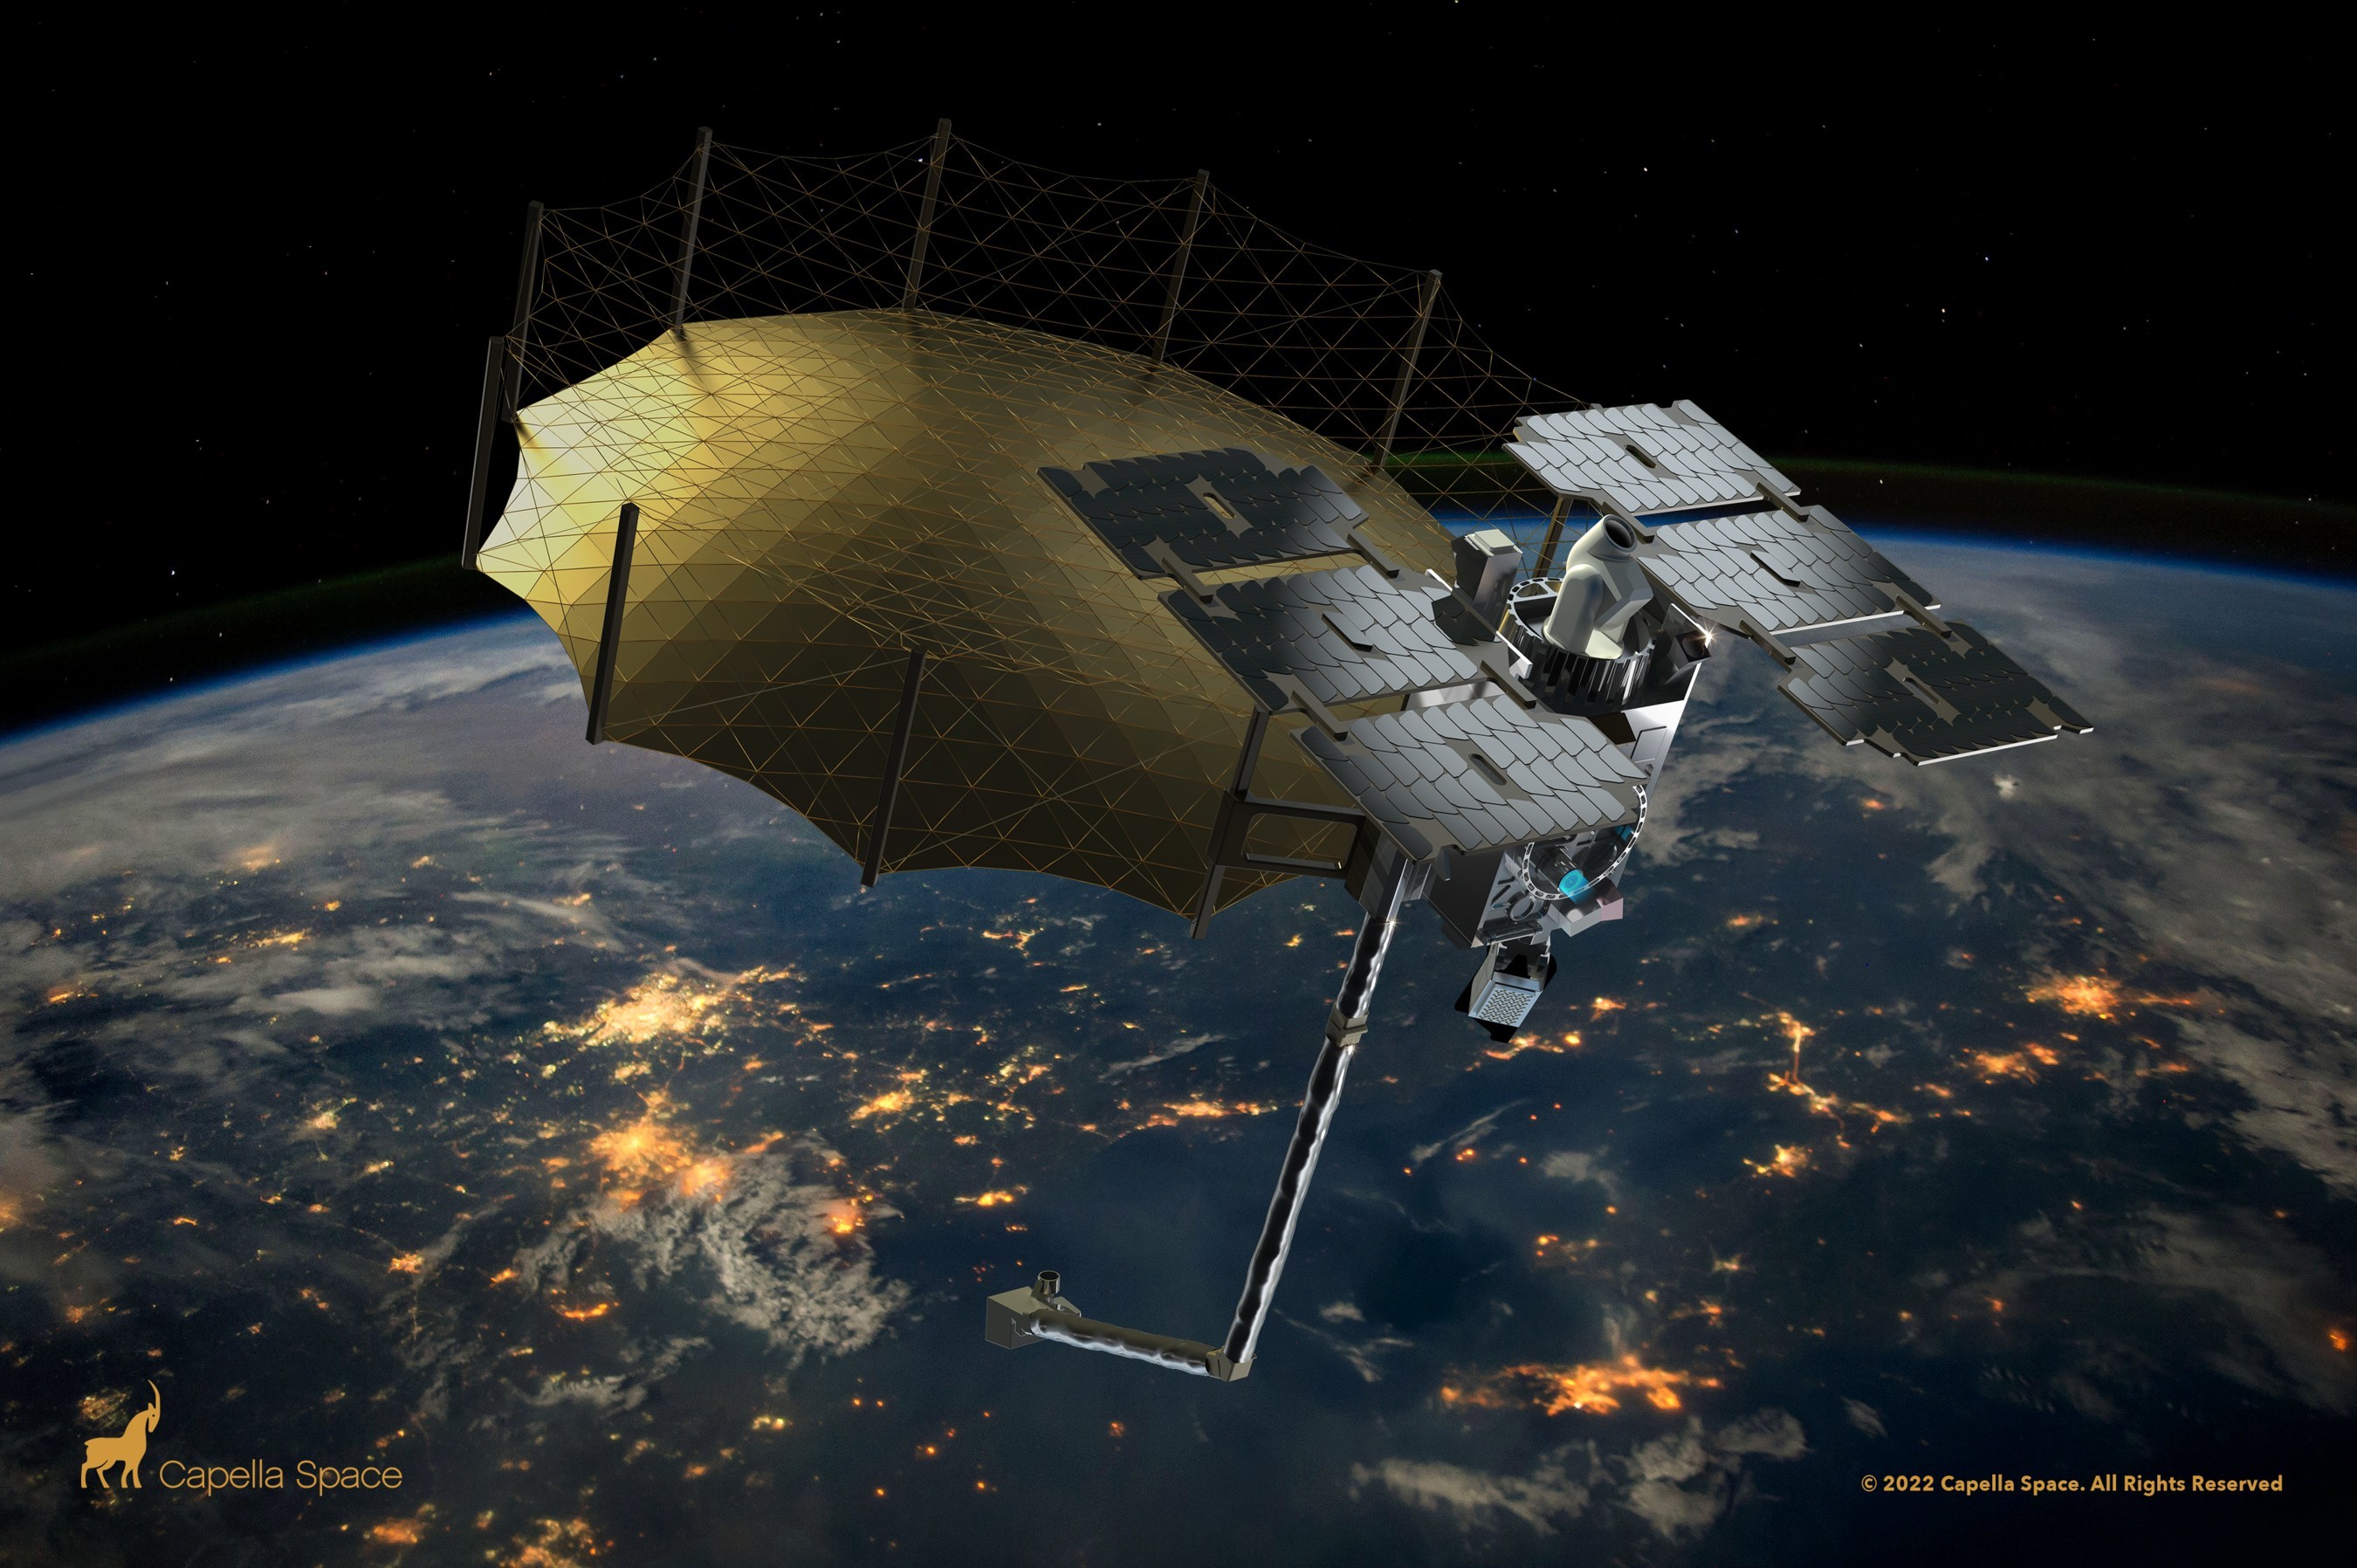 Capella Space Unveils Next Generation Satellite with Enhanced Imagery Capabilities and Communication Features